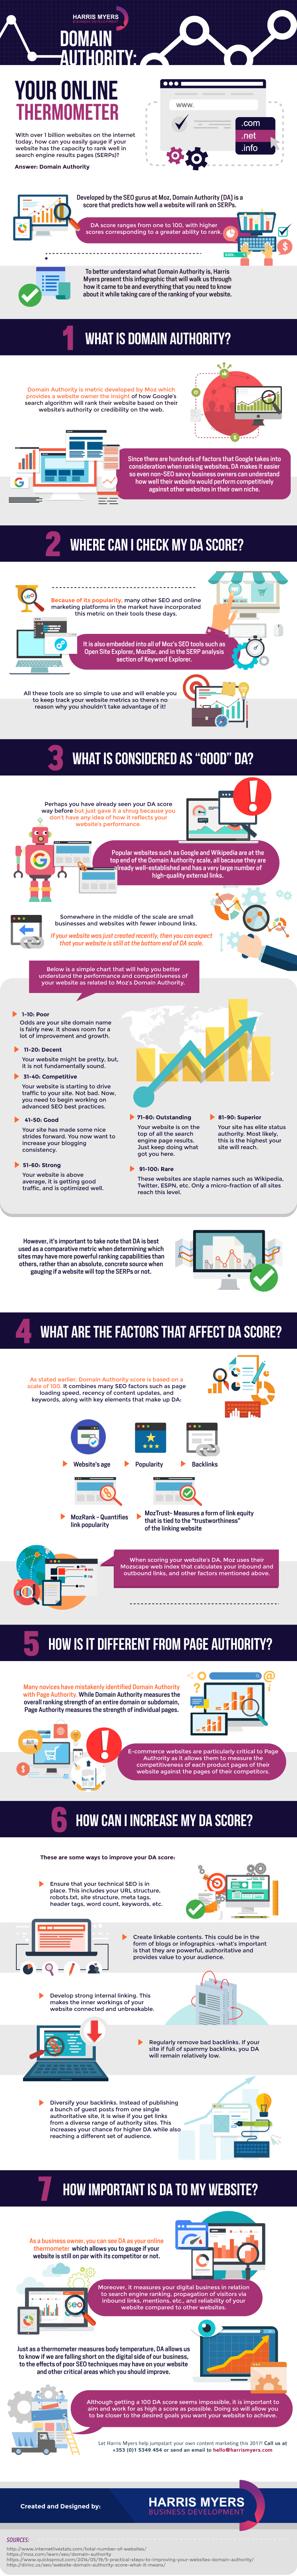 Domain Authority: Your Online Thermometer - #Infographic